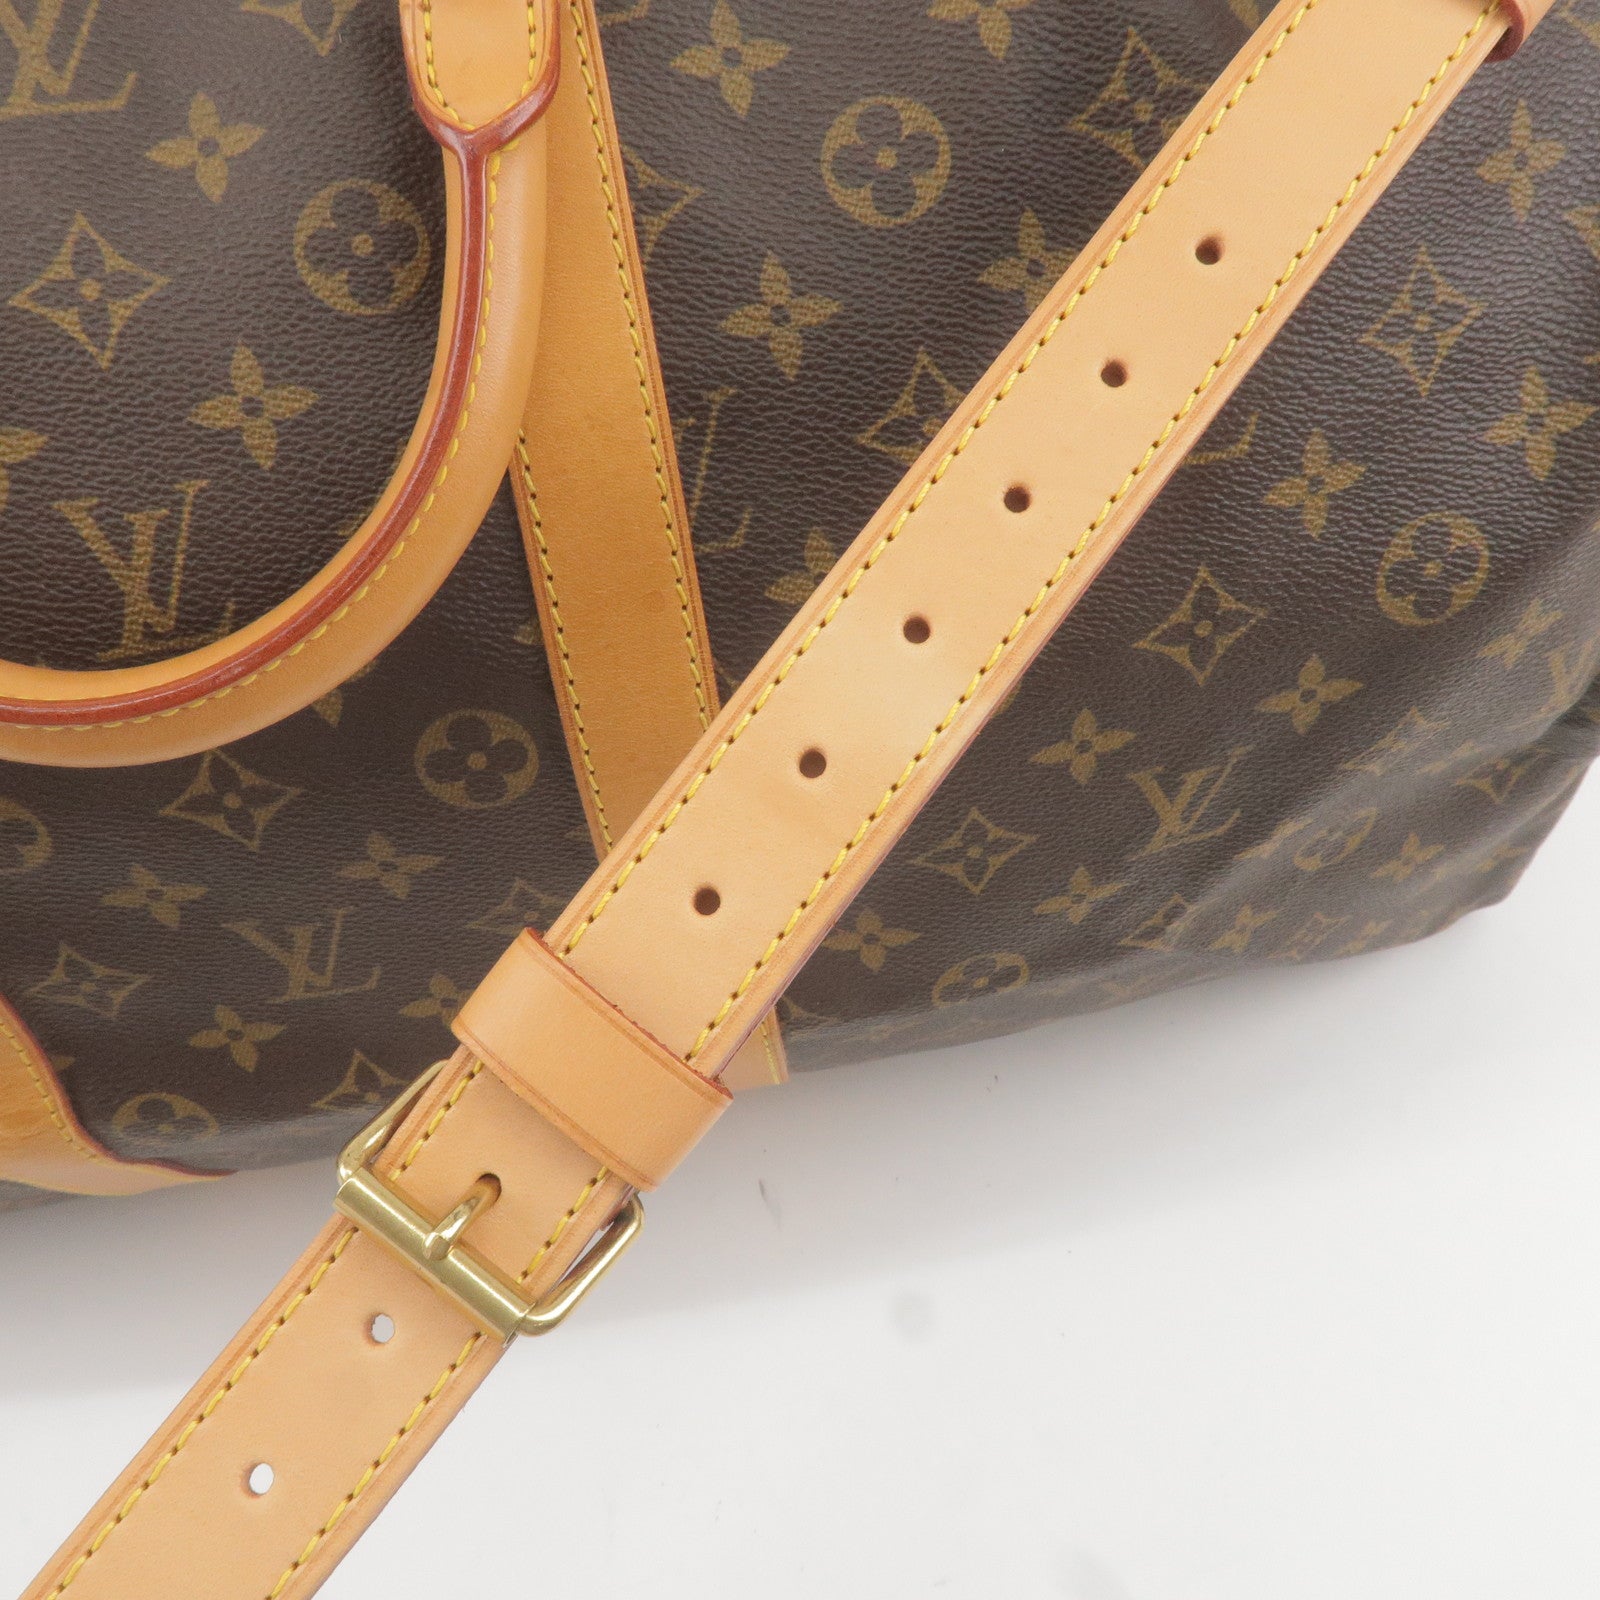 All - Bandouliere - Keep - 55 - louis vuitton pre owned damier ebene duomo  tote bag item - Monogram - Bag - Vuitton - Boston - M41414 – Quotations  from second hand bags Louis Vuitton Keepall 60 - Louis